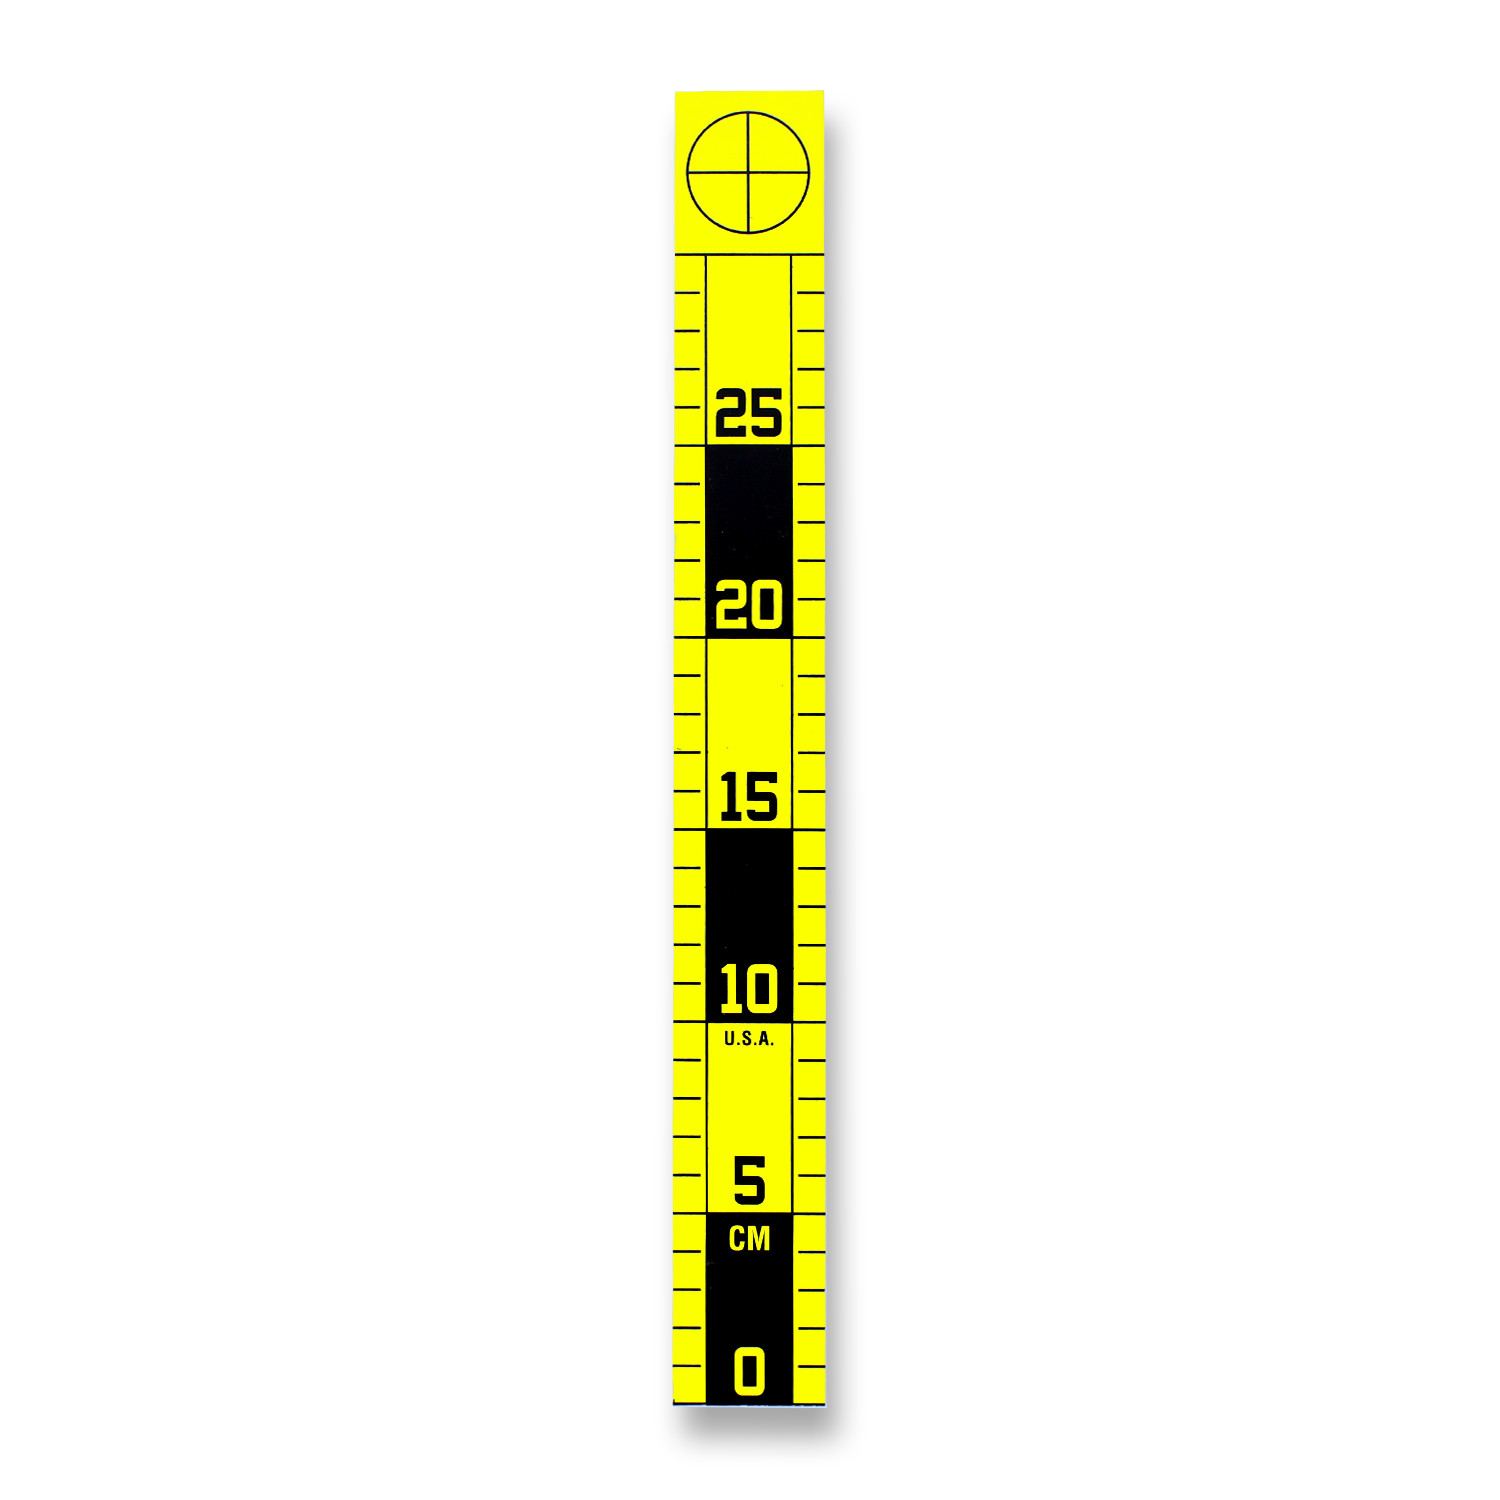 Metric 2-Sided Ruler - 30cm Left to Right or 30cm Vertical